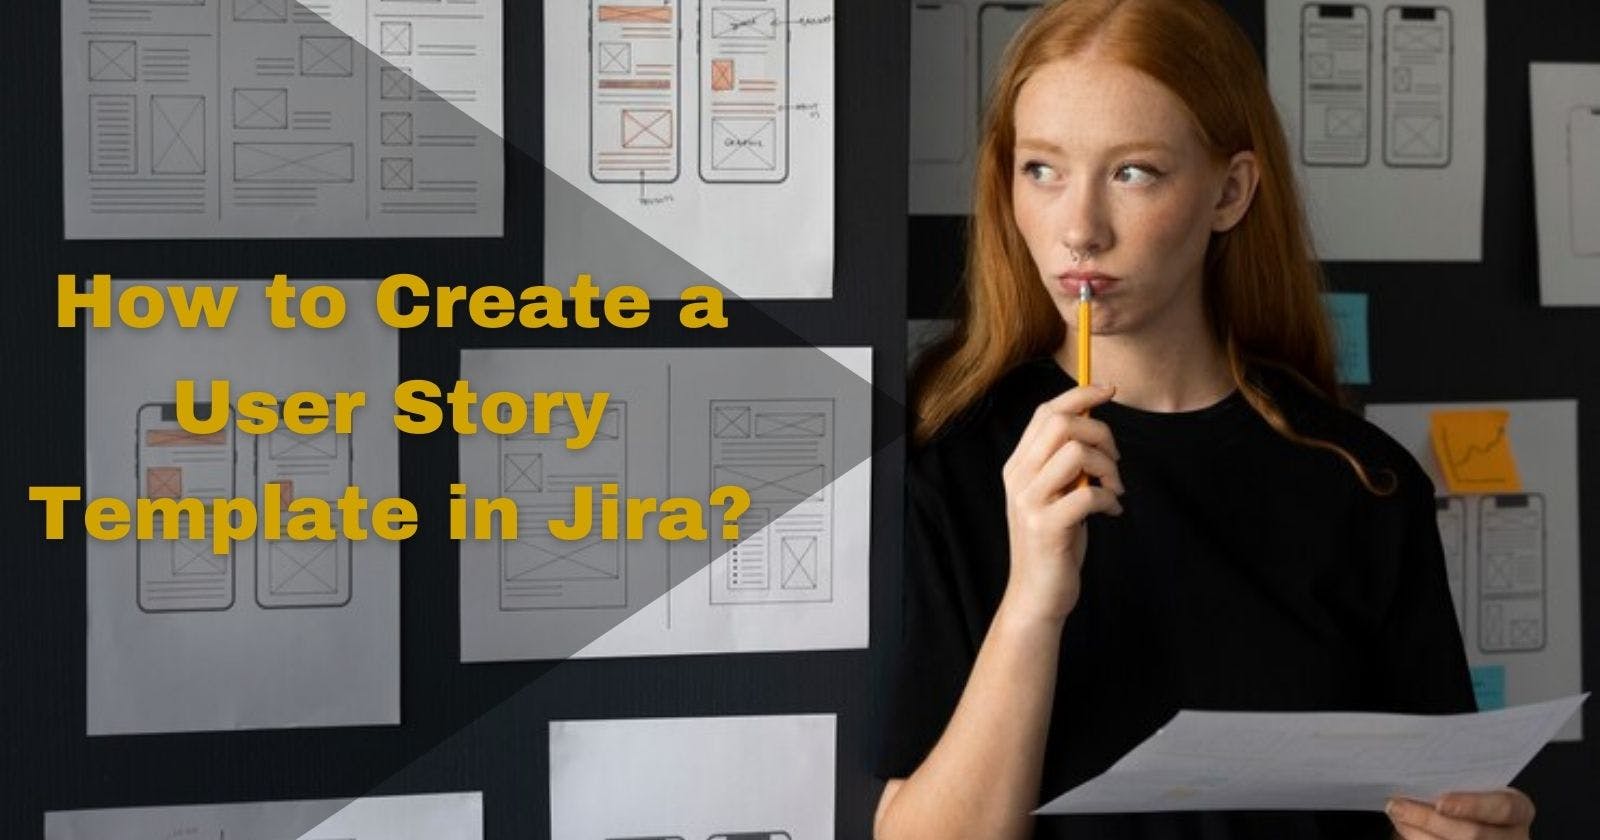 How to Create a User Story Template in Jira?